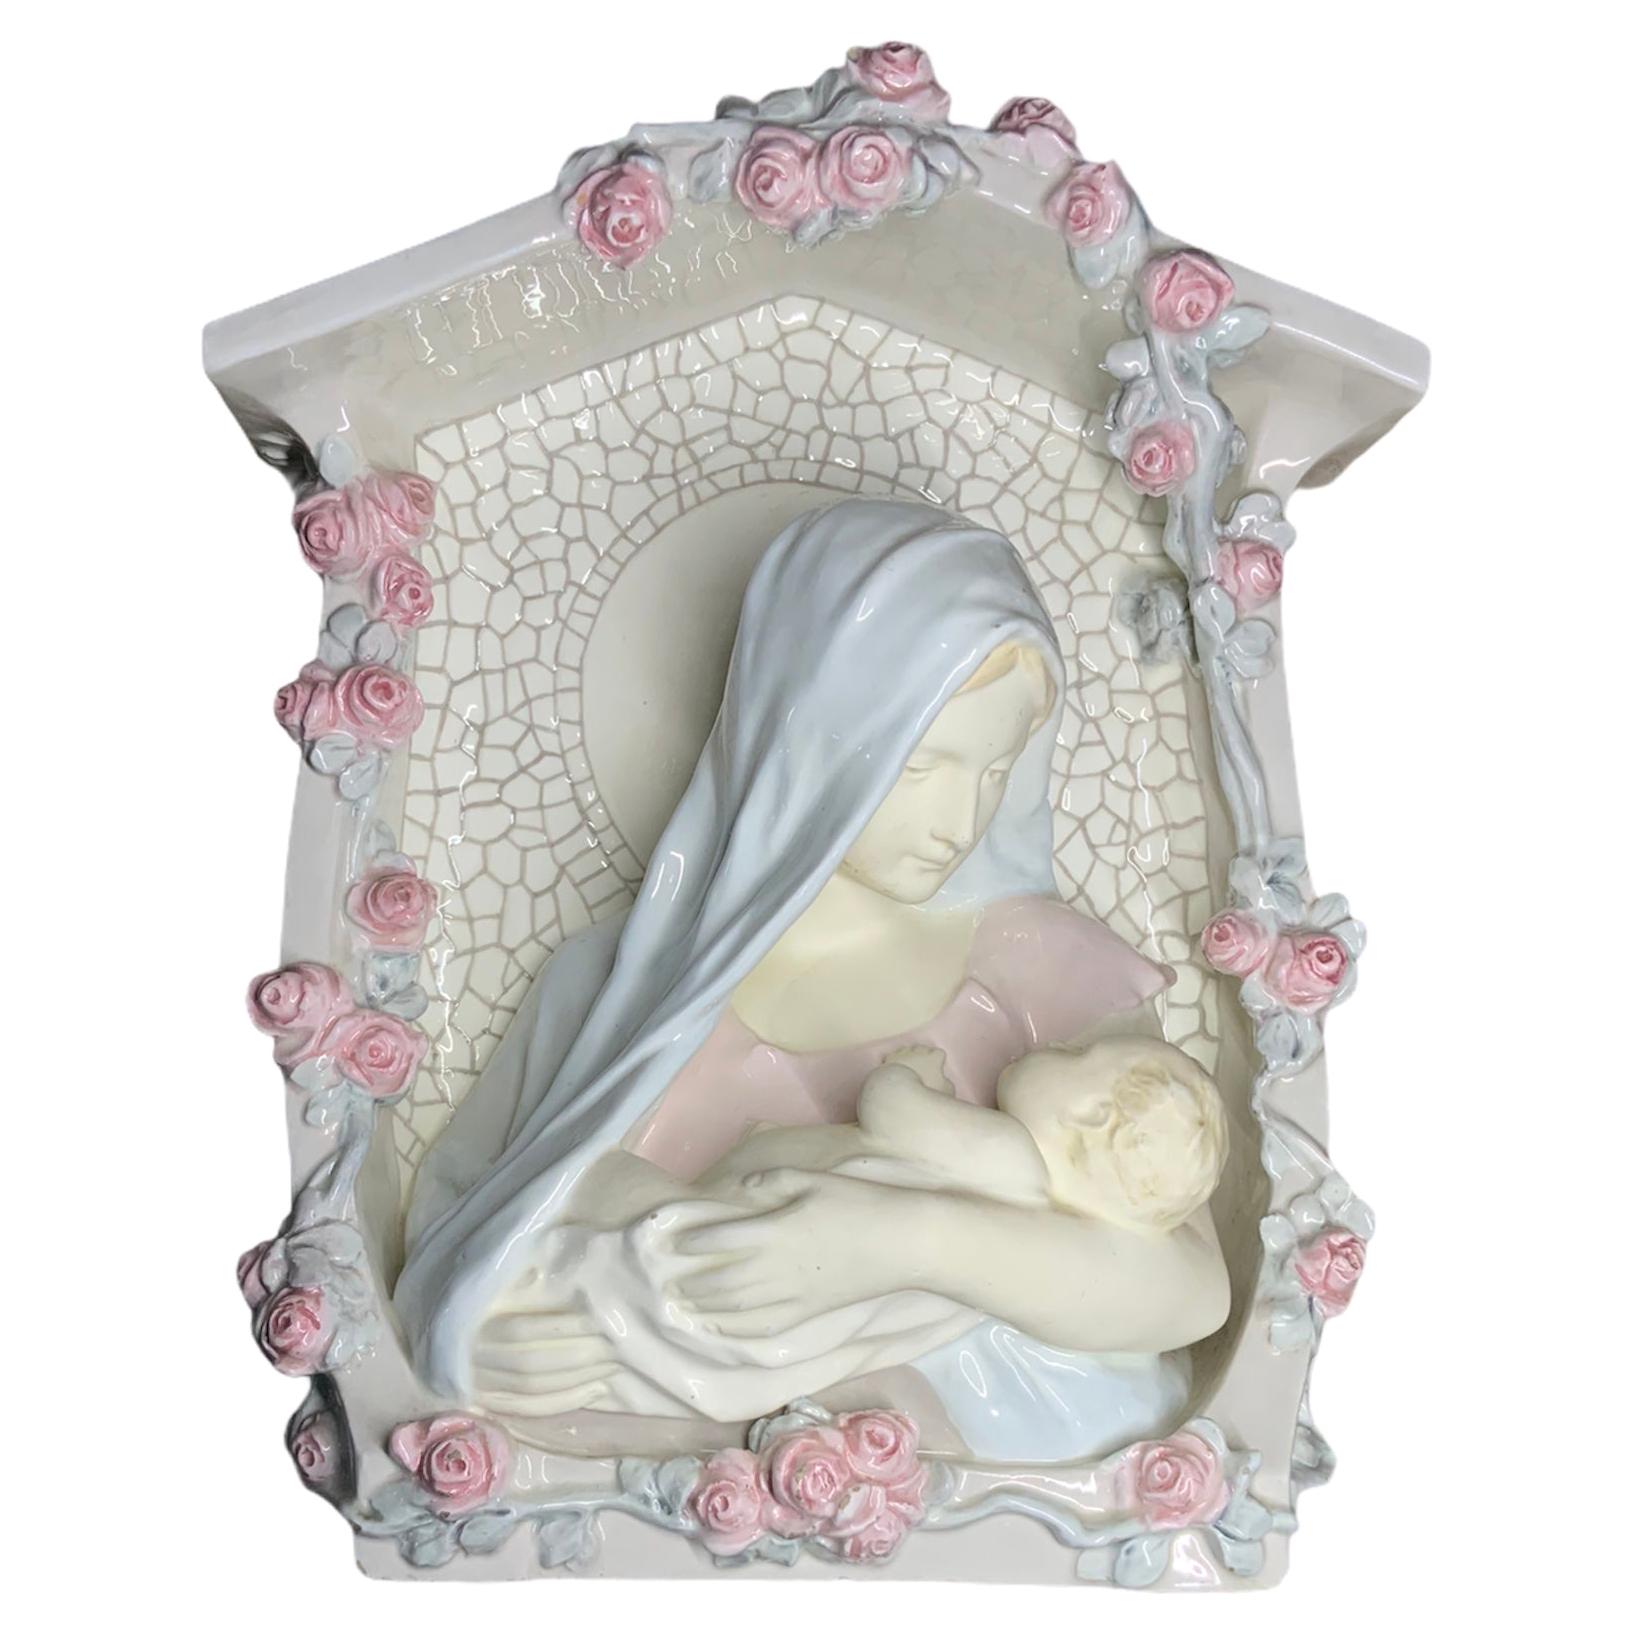 Rare Wall Religious Porcelain Niche of Virgin Mary Bust and Baby Jesus